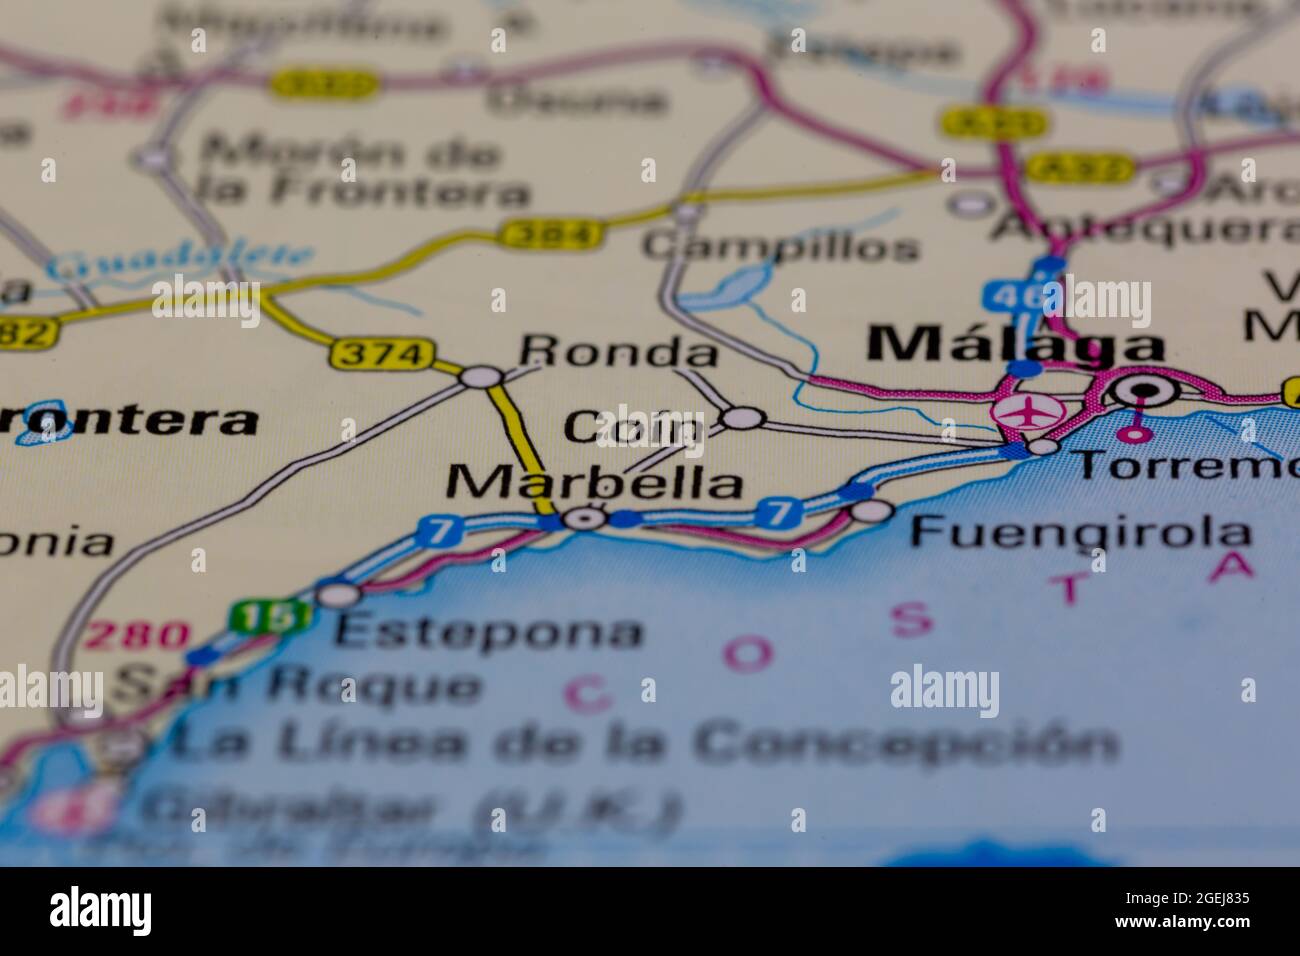 Coin Spain shown on a road map or Geography map Stock Photo